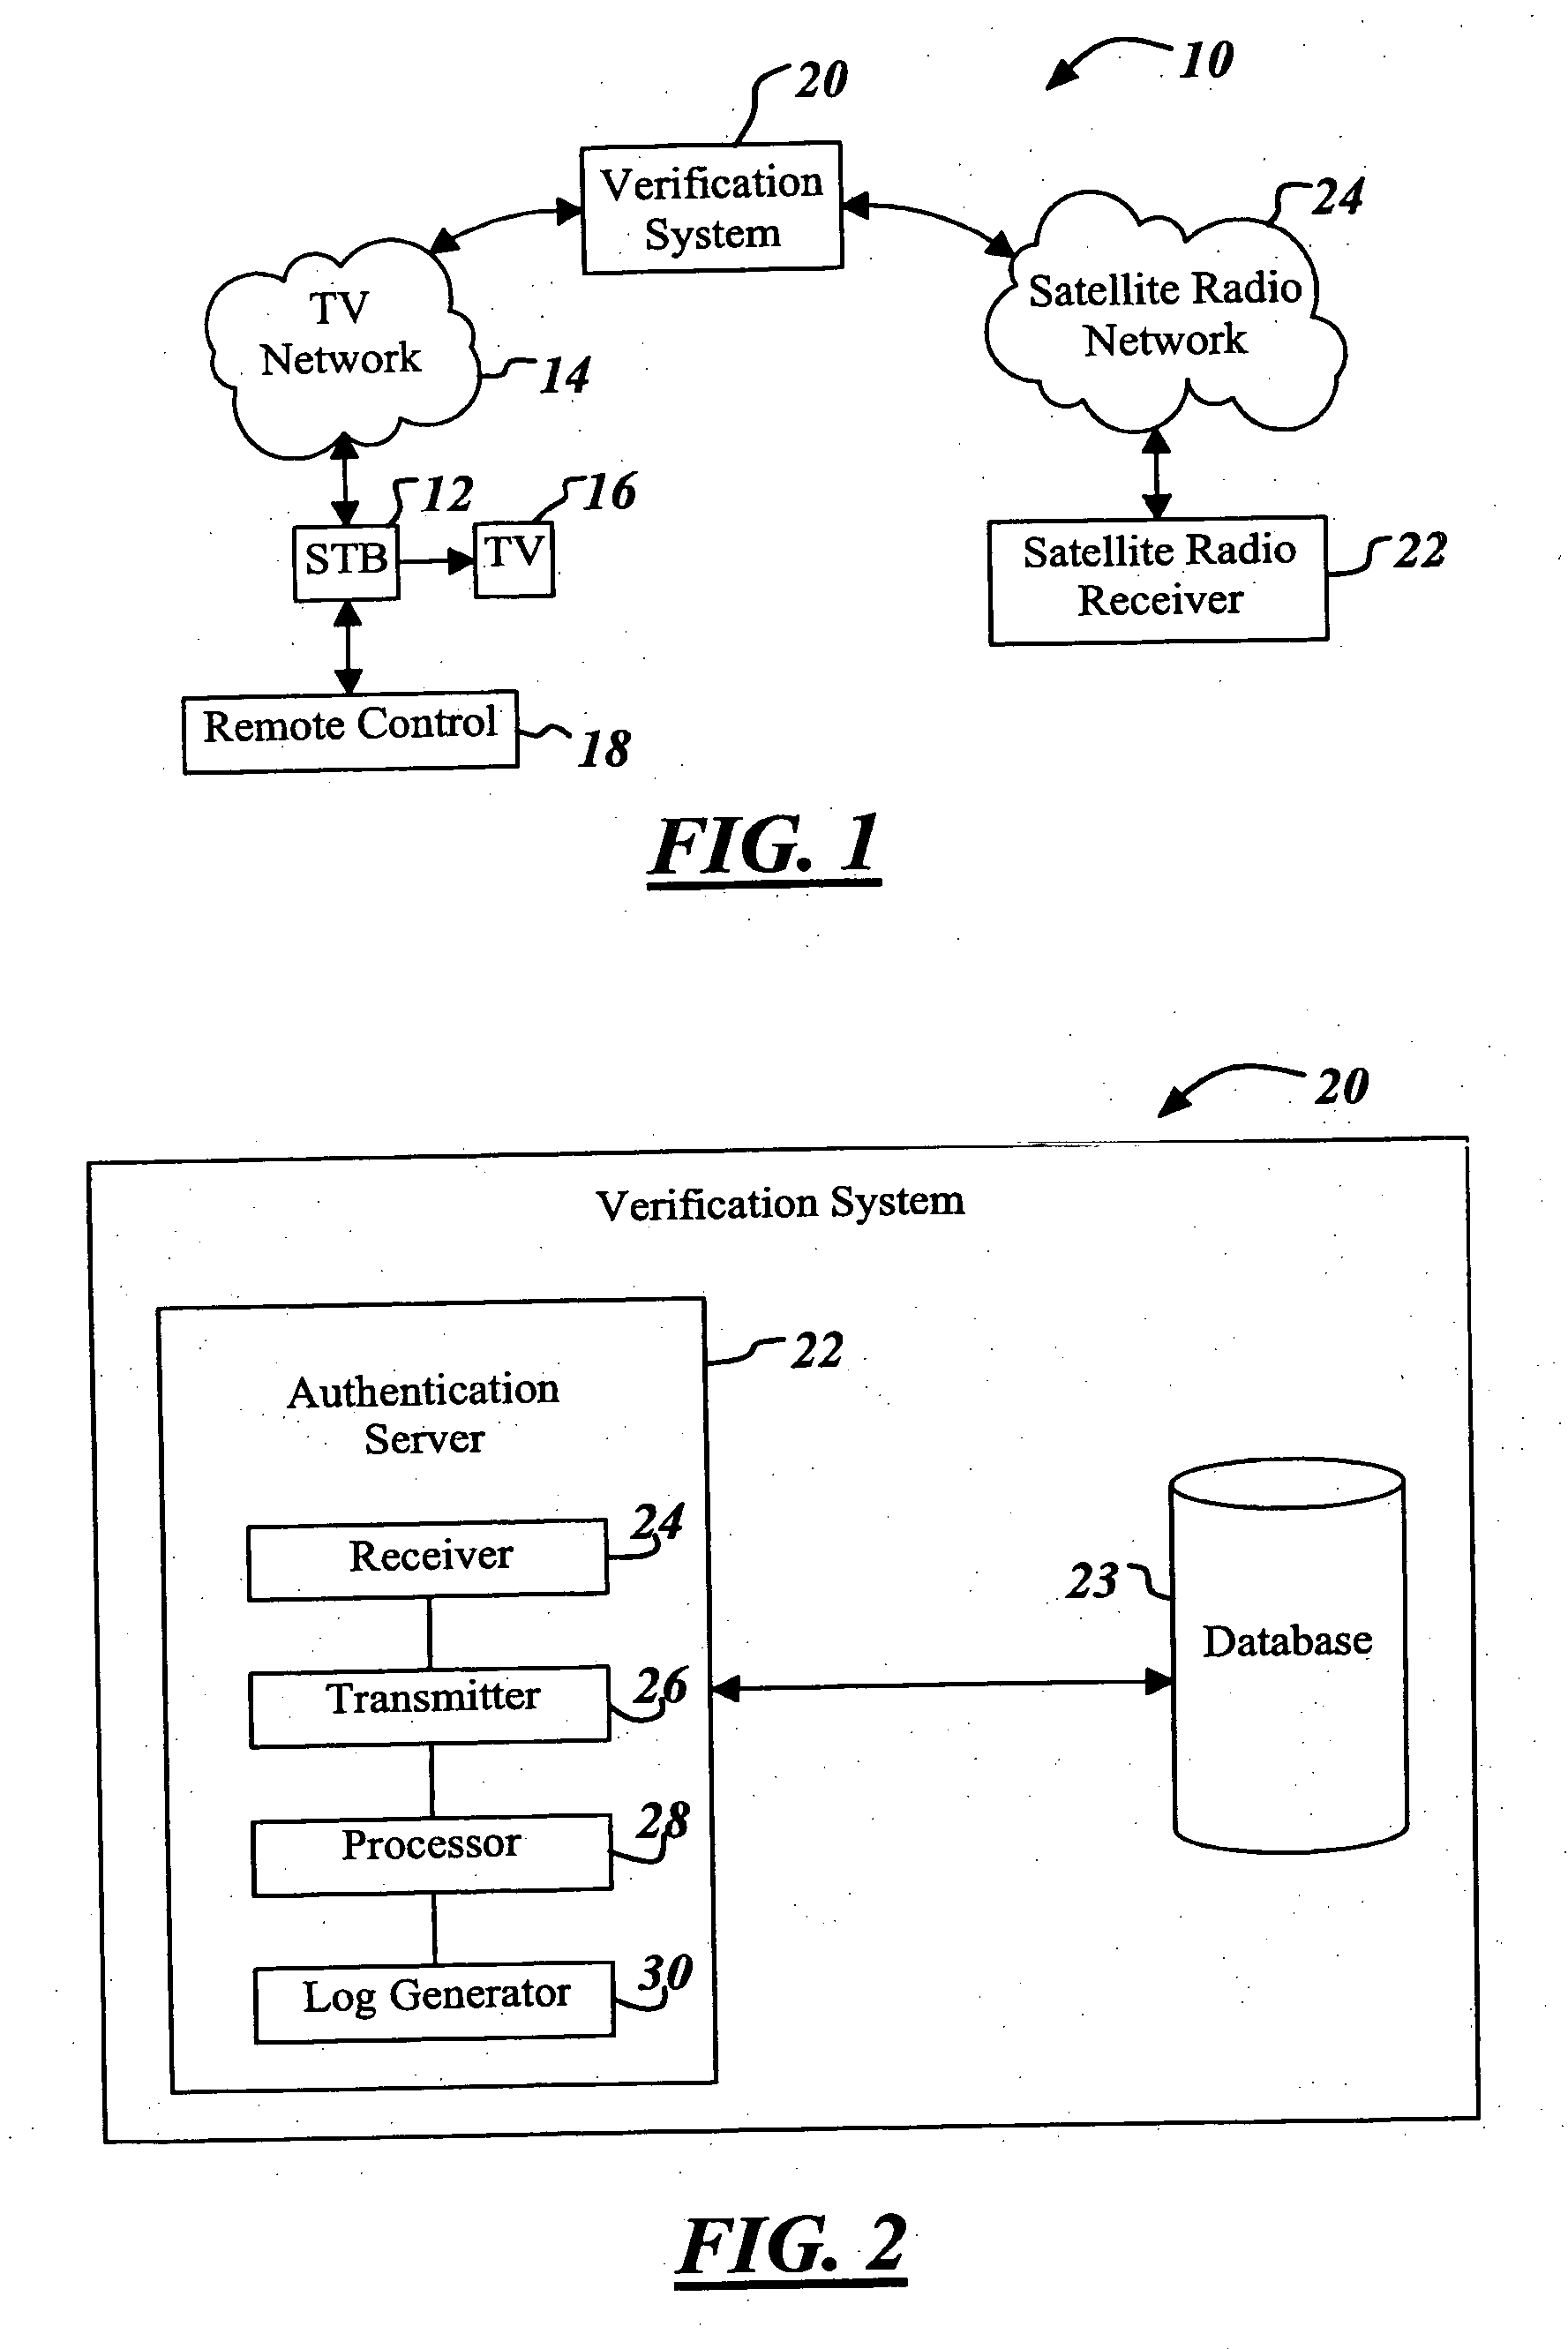 Method and system for biometric based access control of media content presentation devices